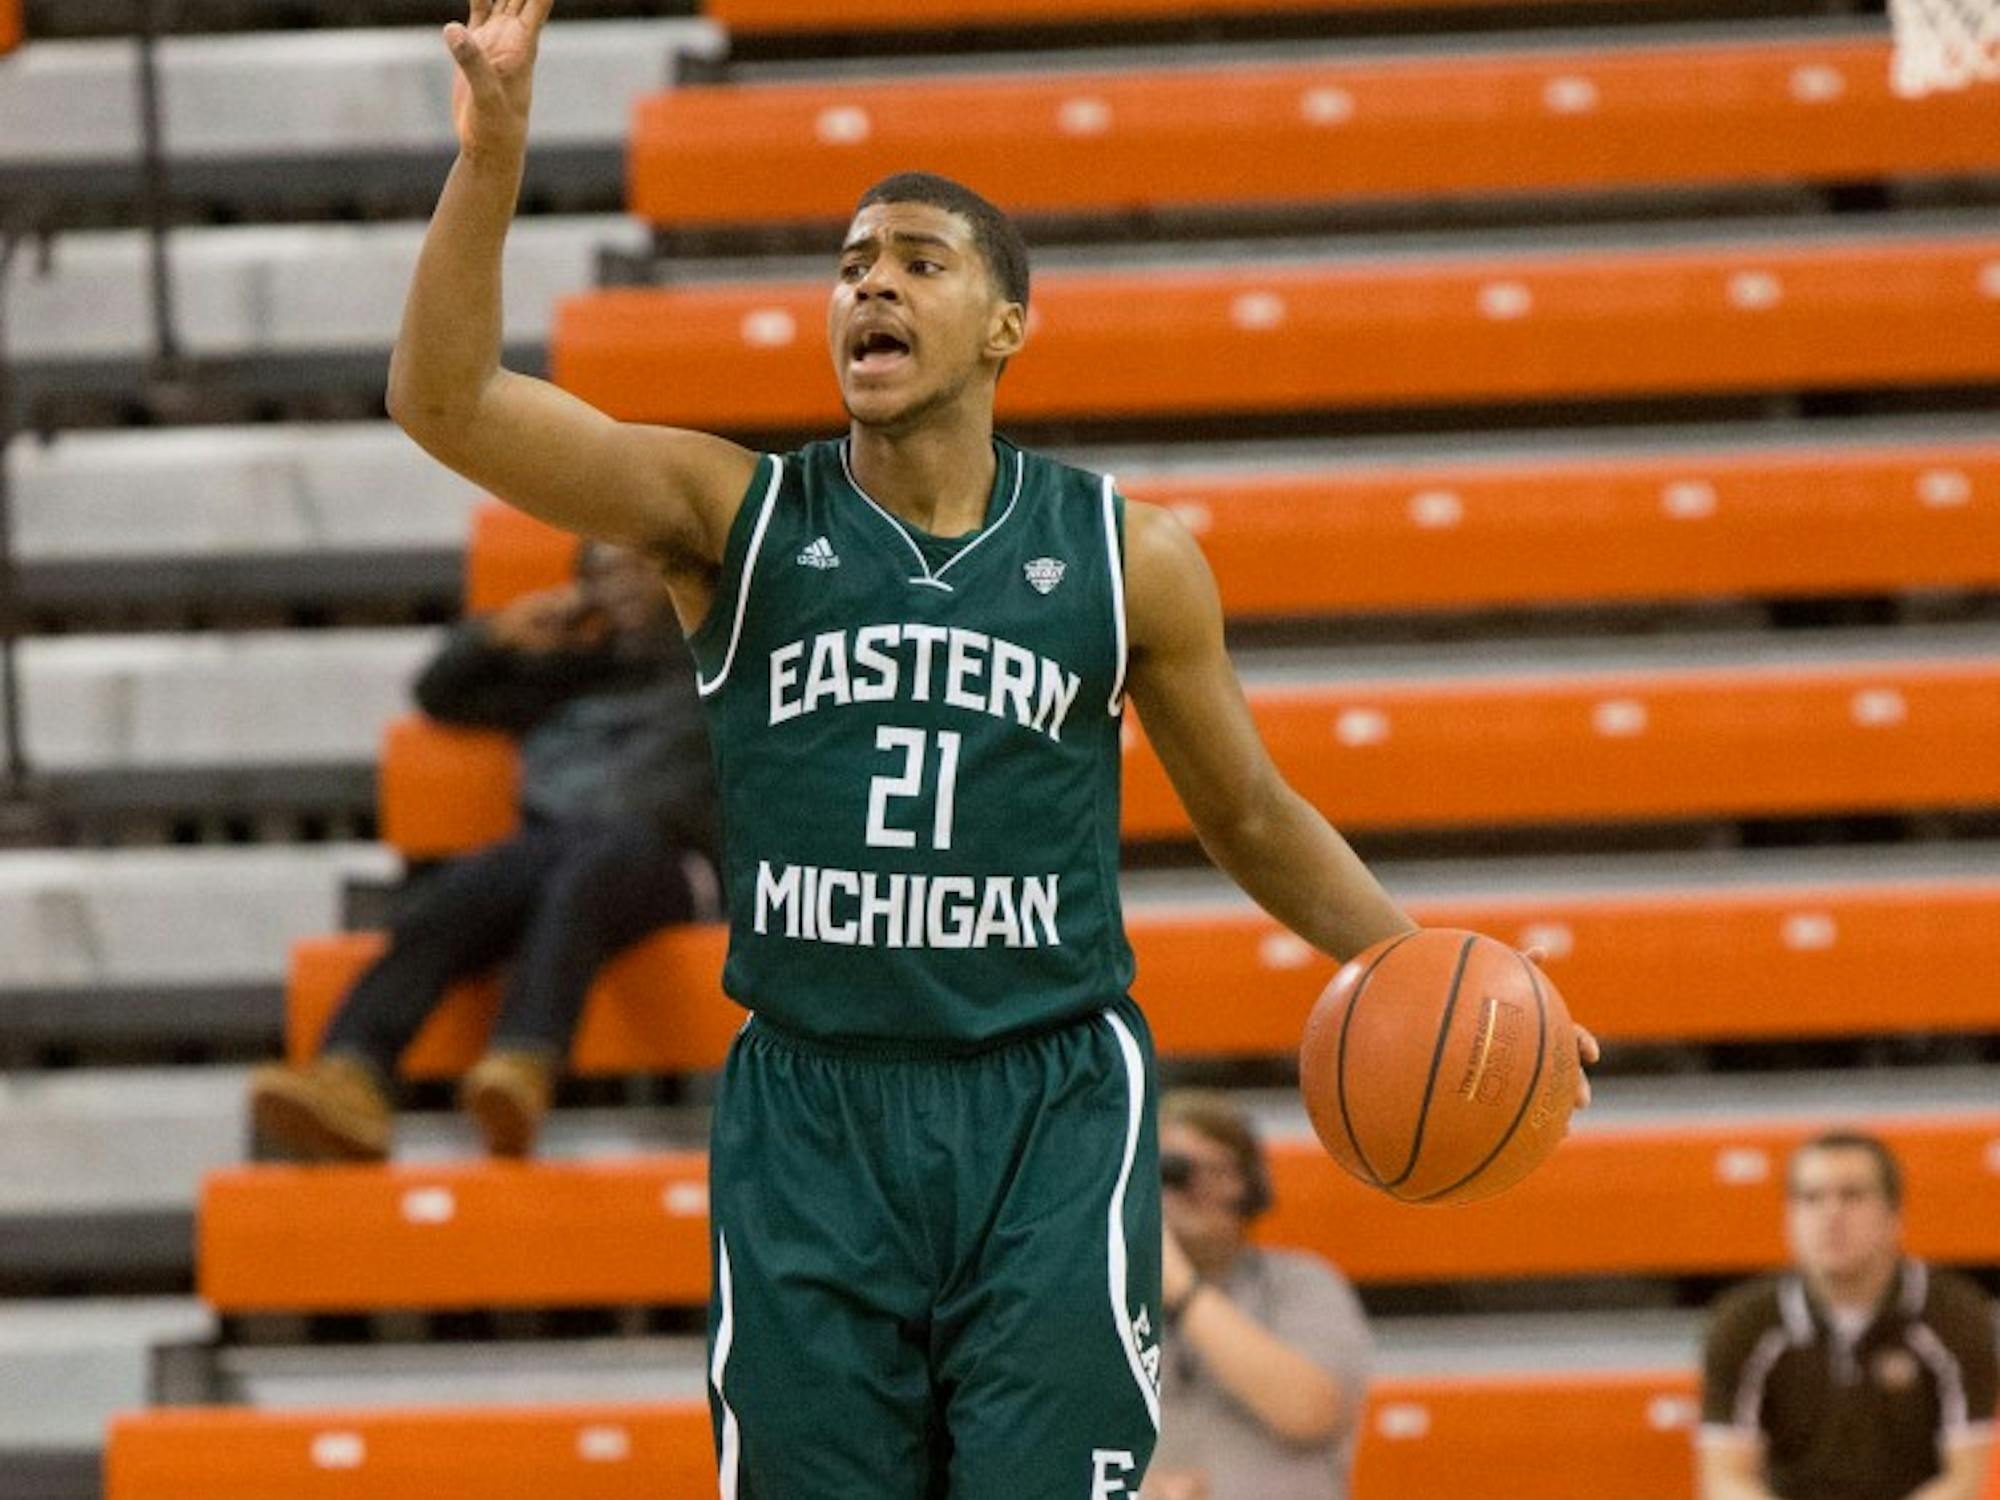 EMU guard Jalen Ross dribbles up court in Eastern Michigan's 56-51 win over Bowling Green Wednesday night.